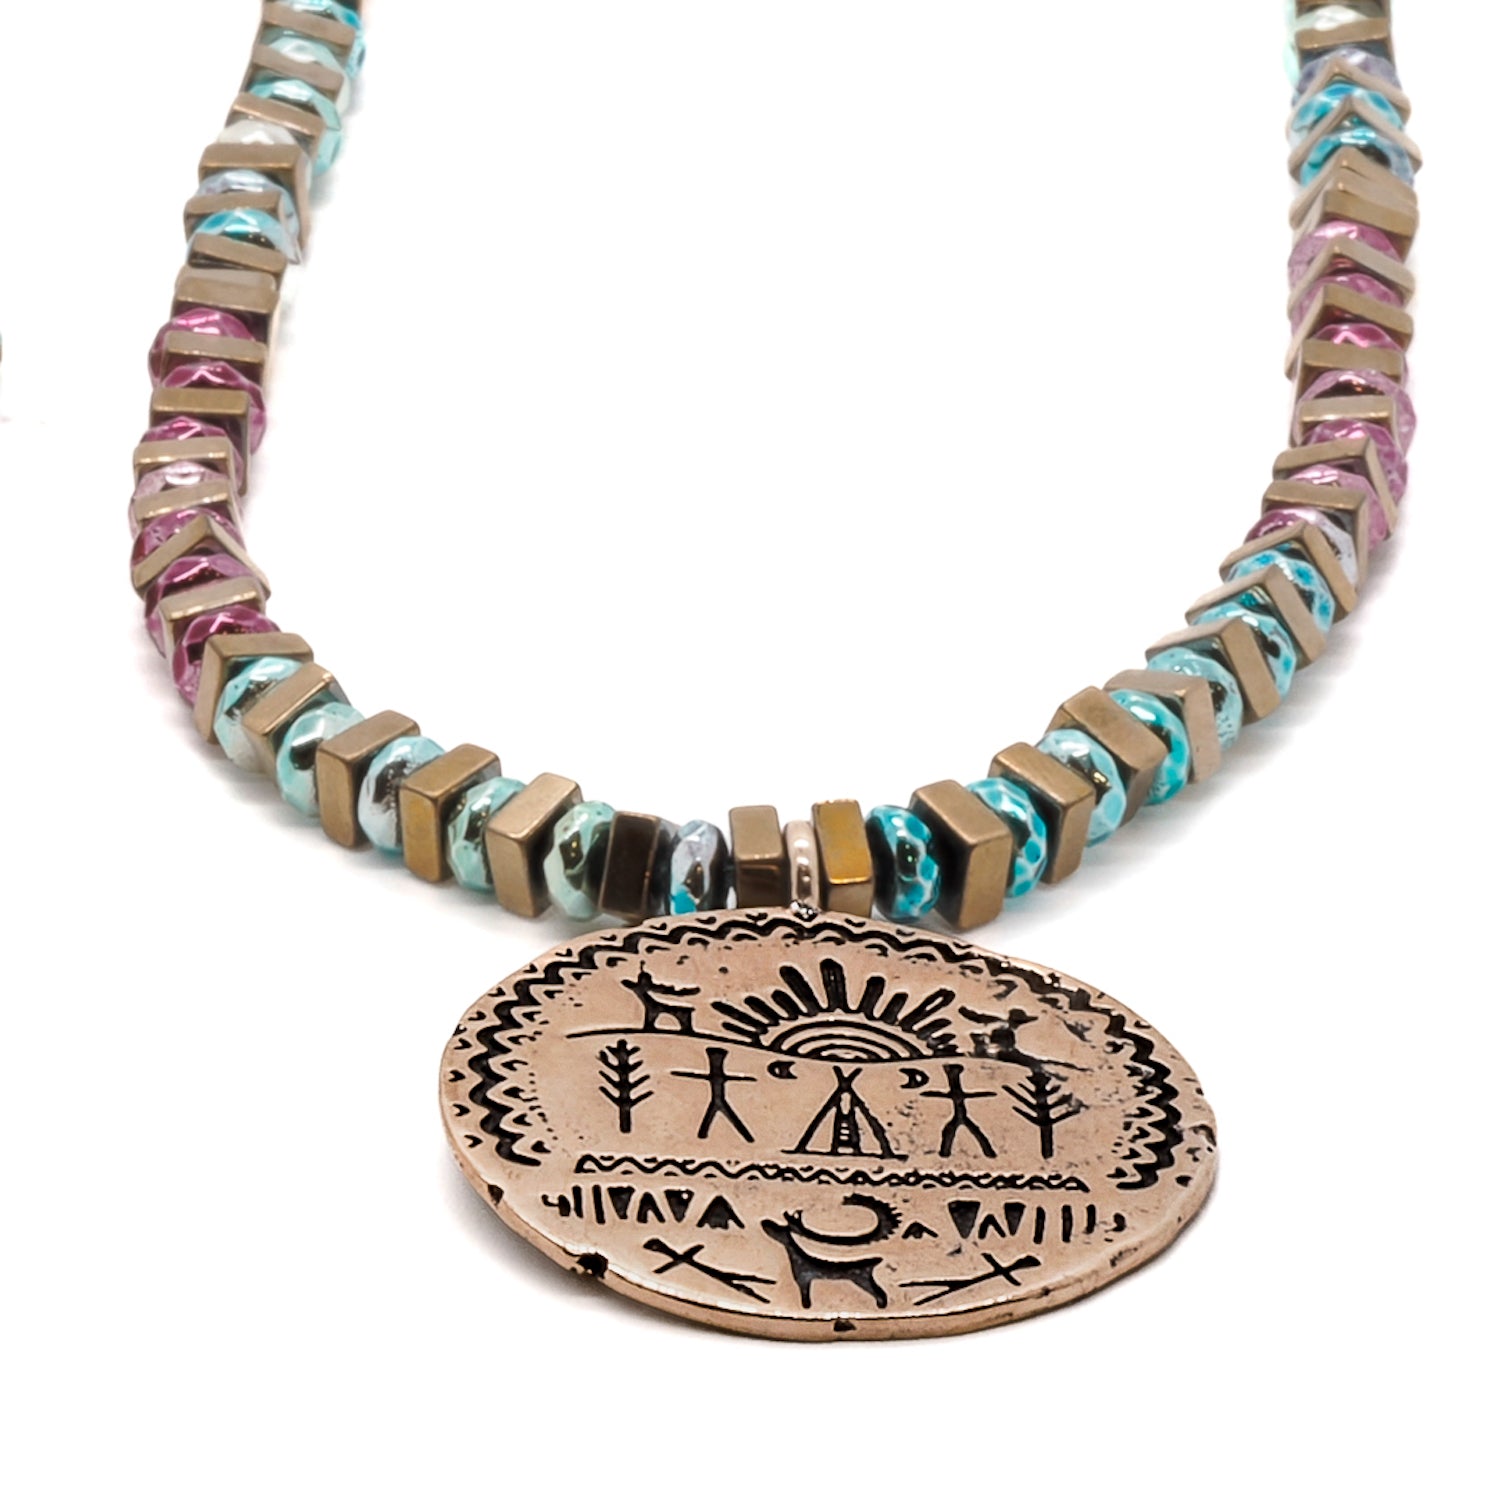 Mystical Power and Protection - Blue, Pink, and Gold Hematite Stone Beads Necklace.